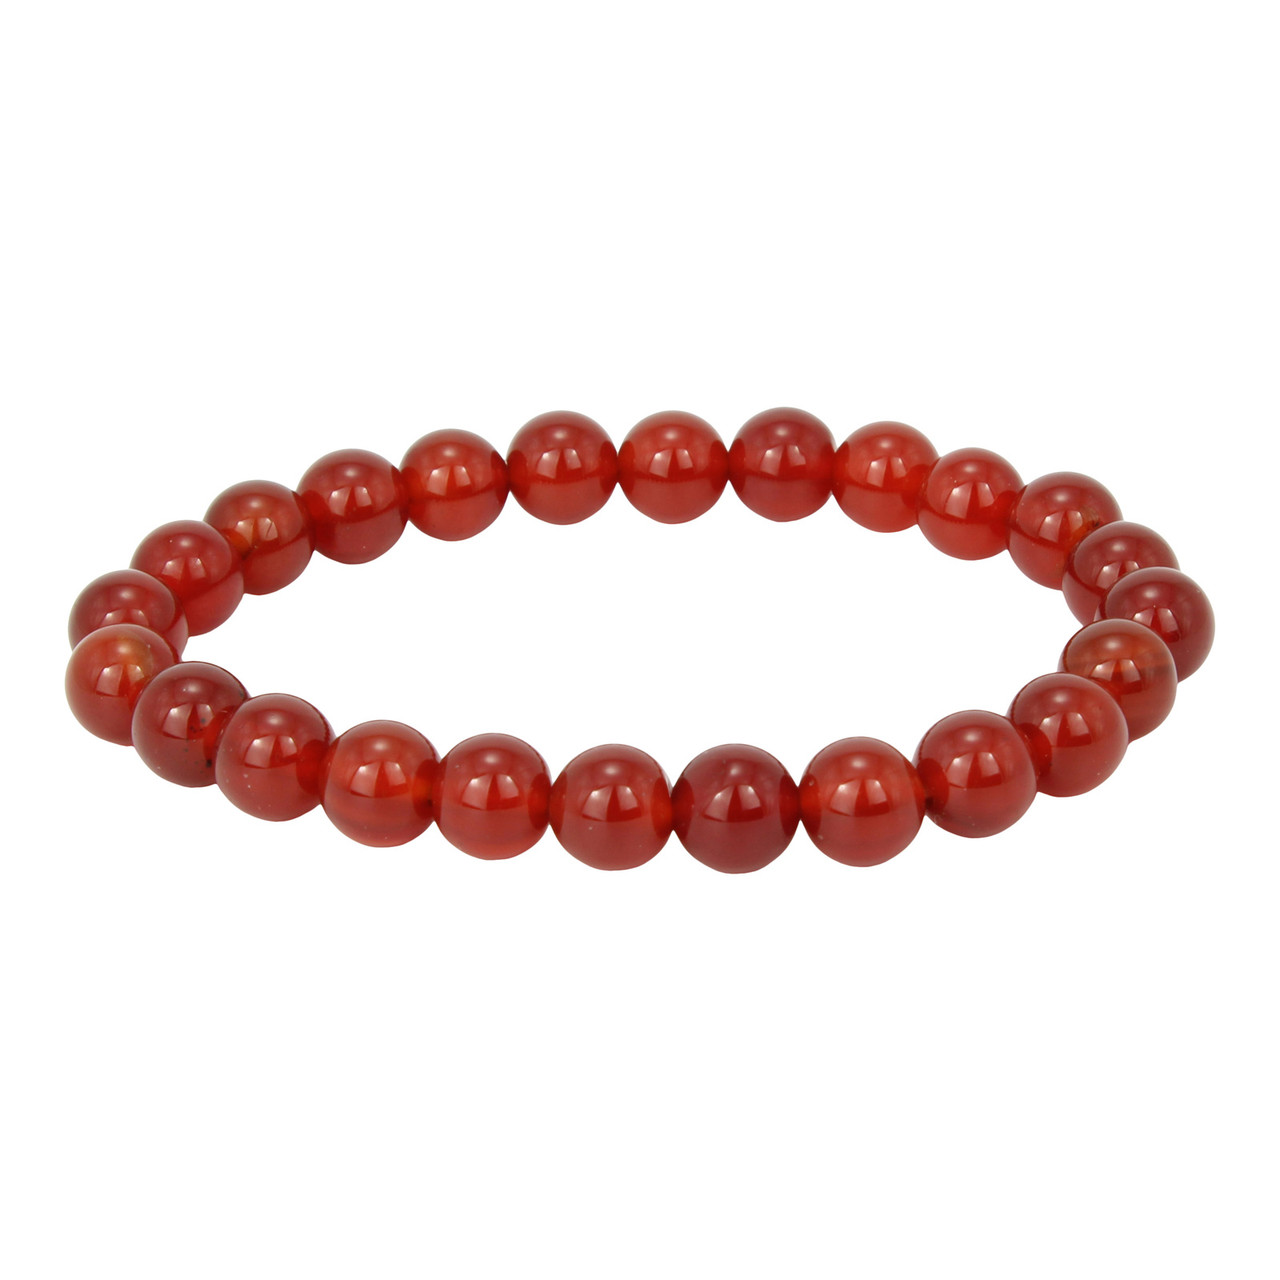 China Red Agate Bracelet Wholesale